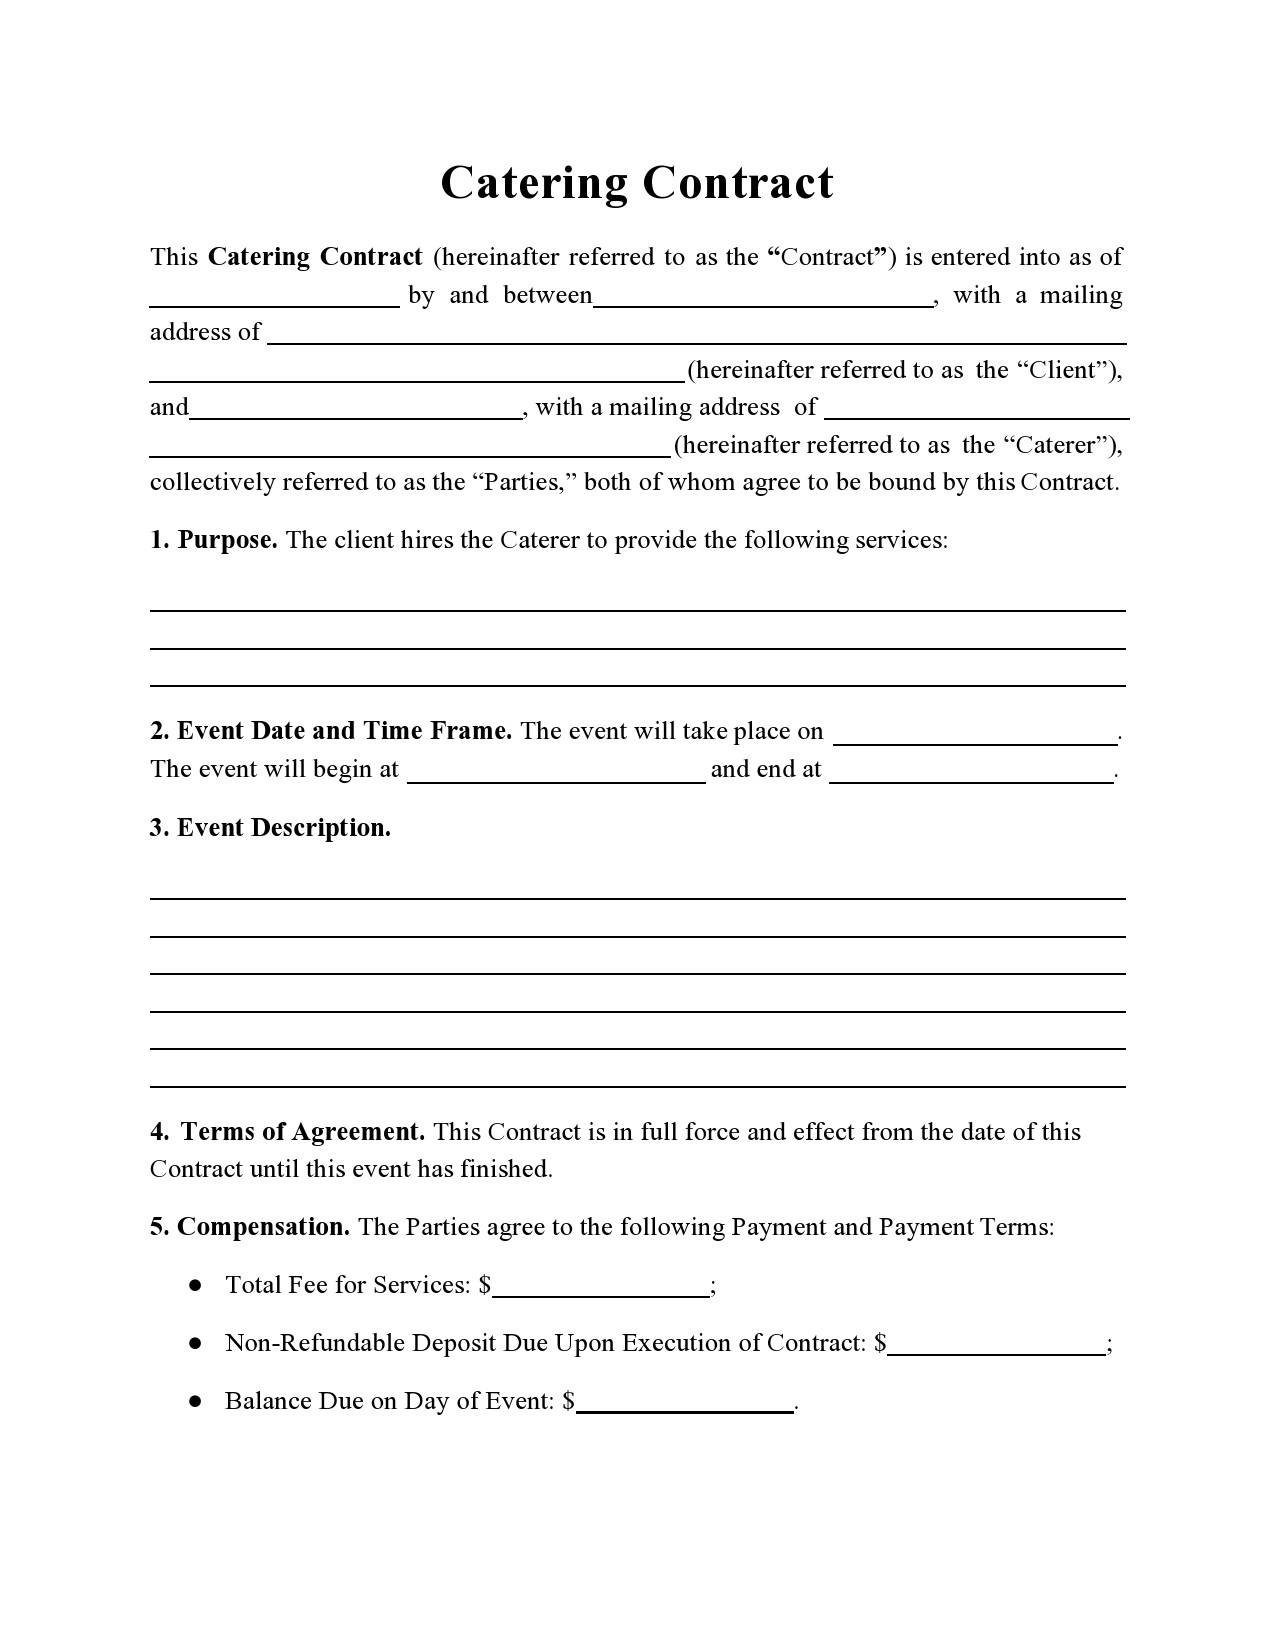 Catering Contract Template Word Clonazepamiia